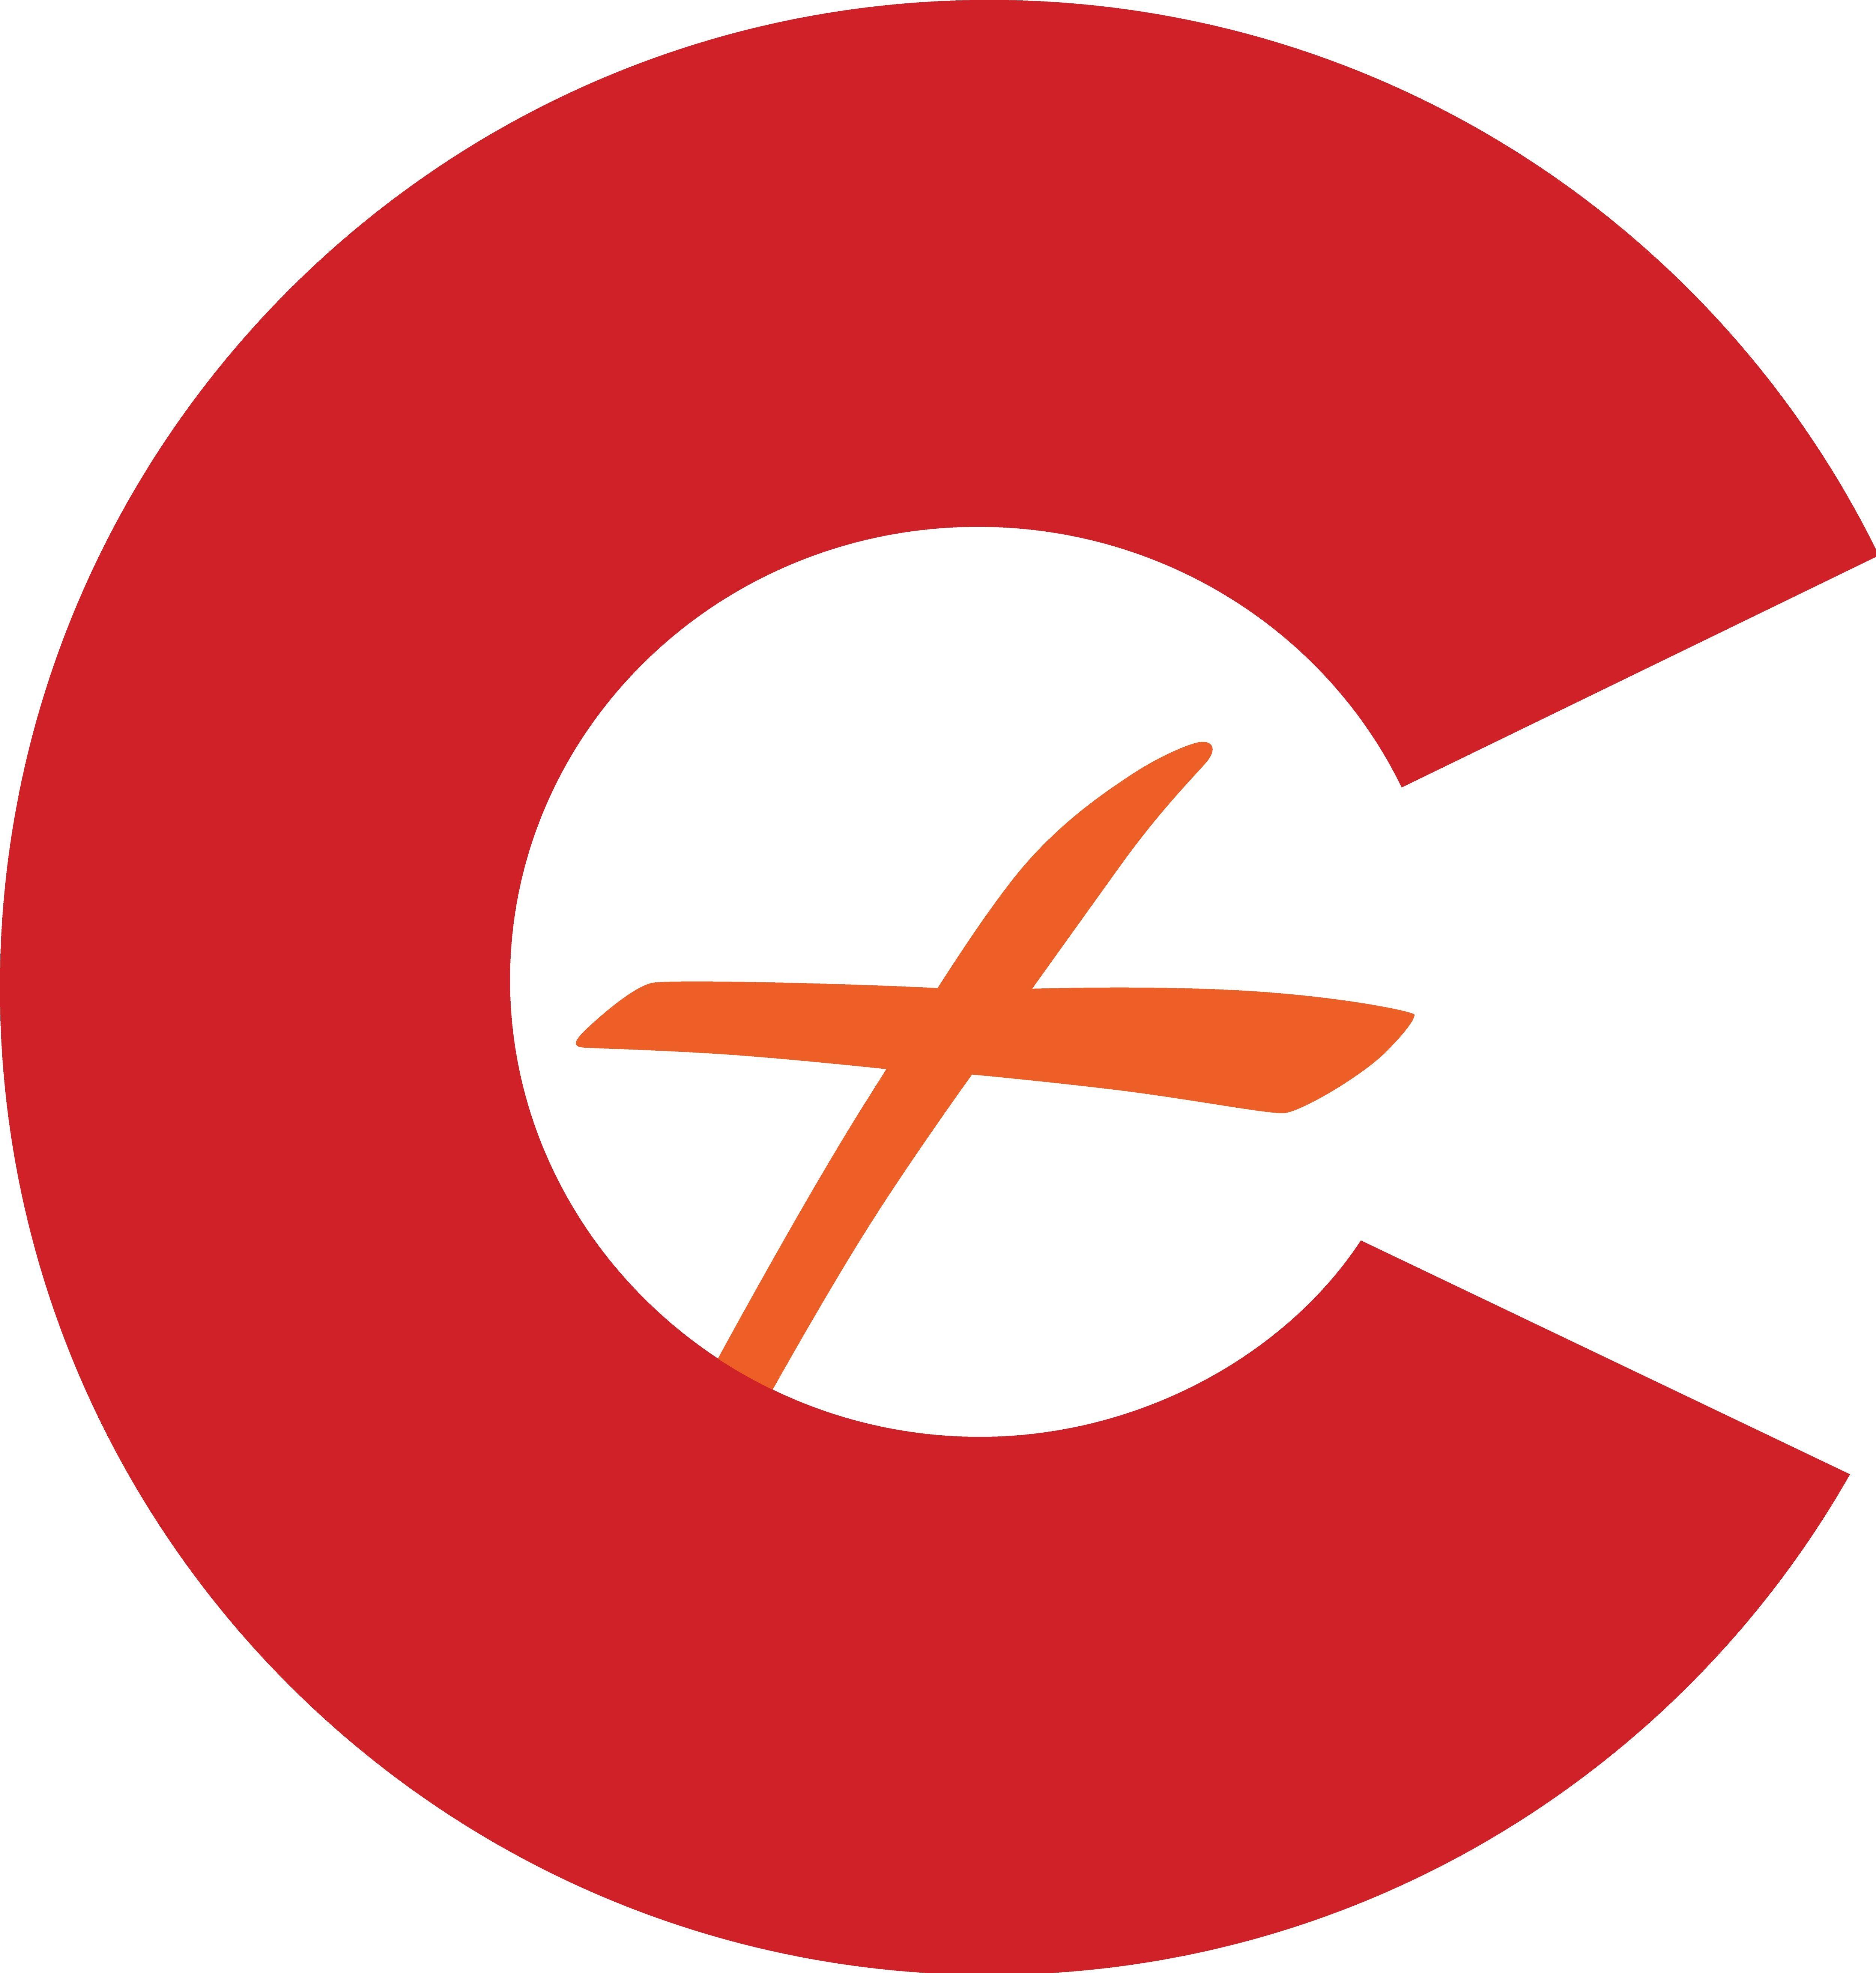 Red C Logo - About Us | Central Christian Church of Denver